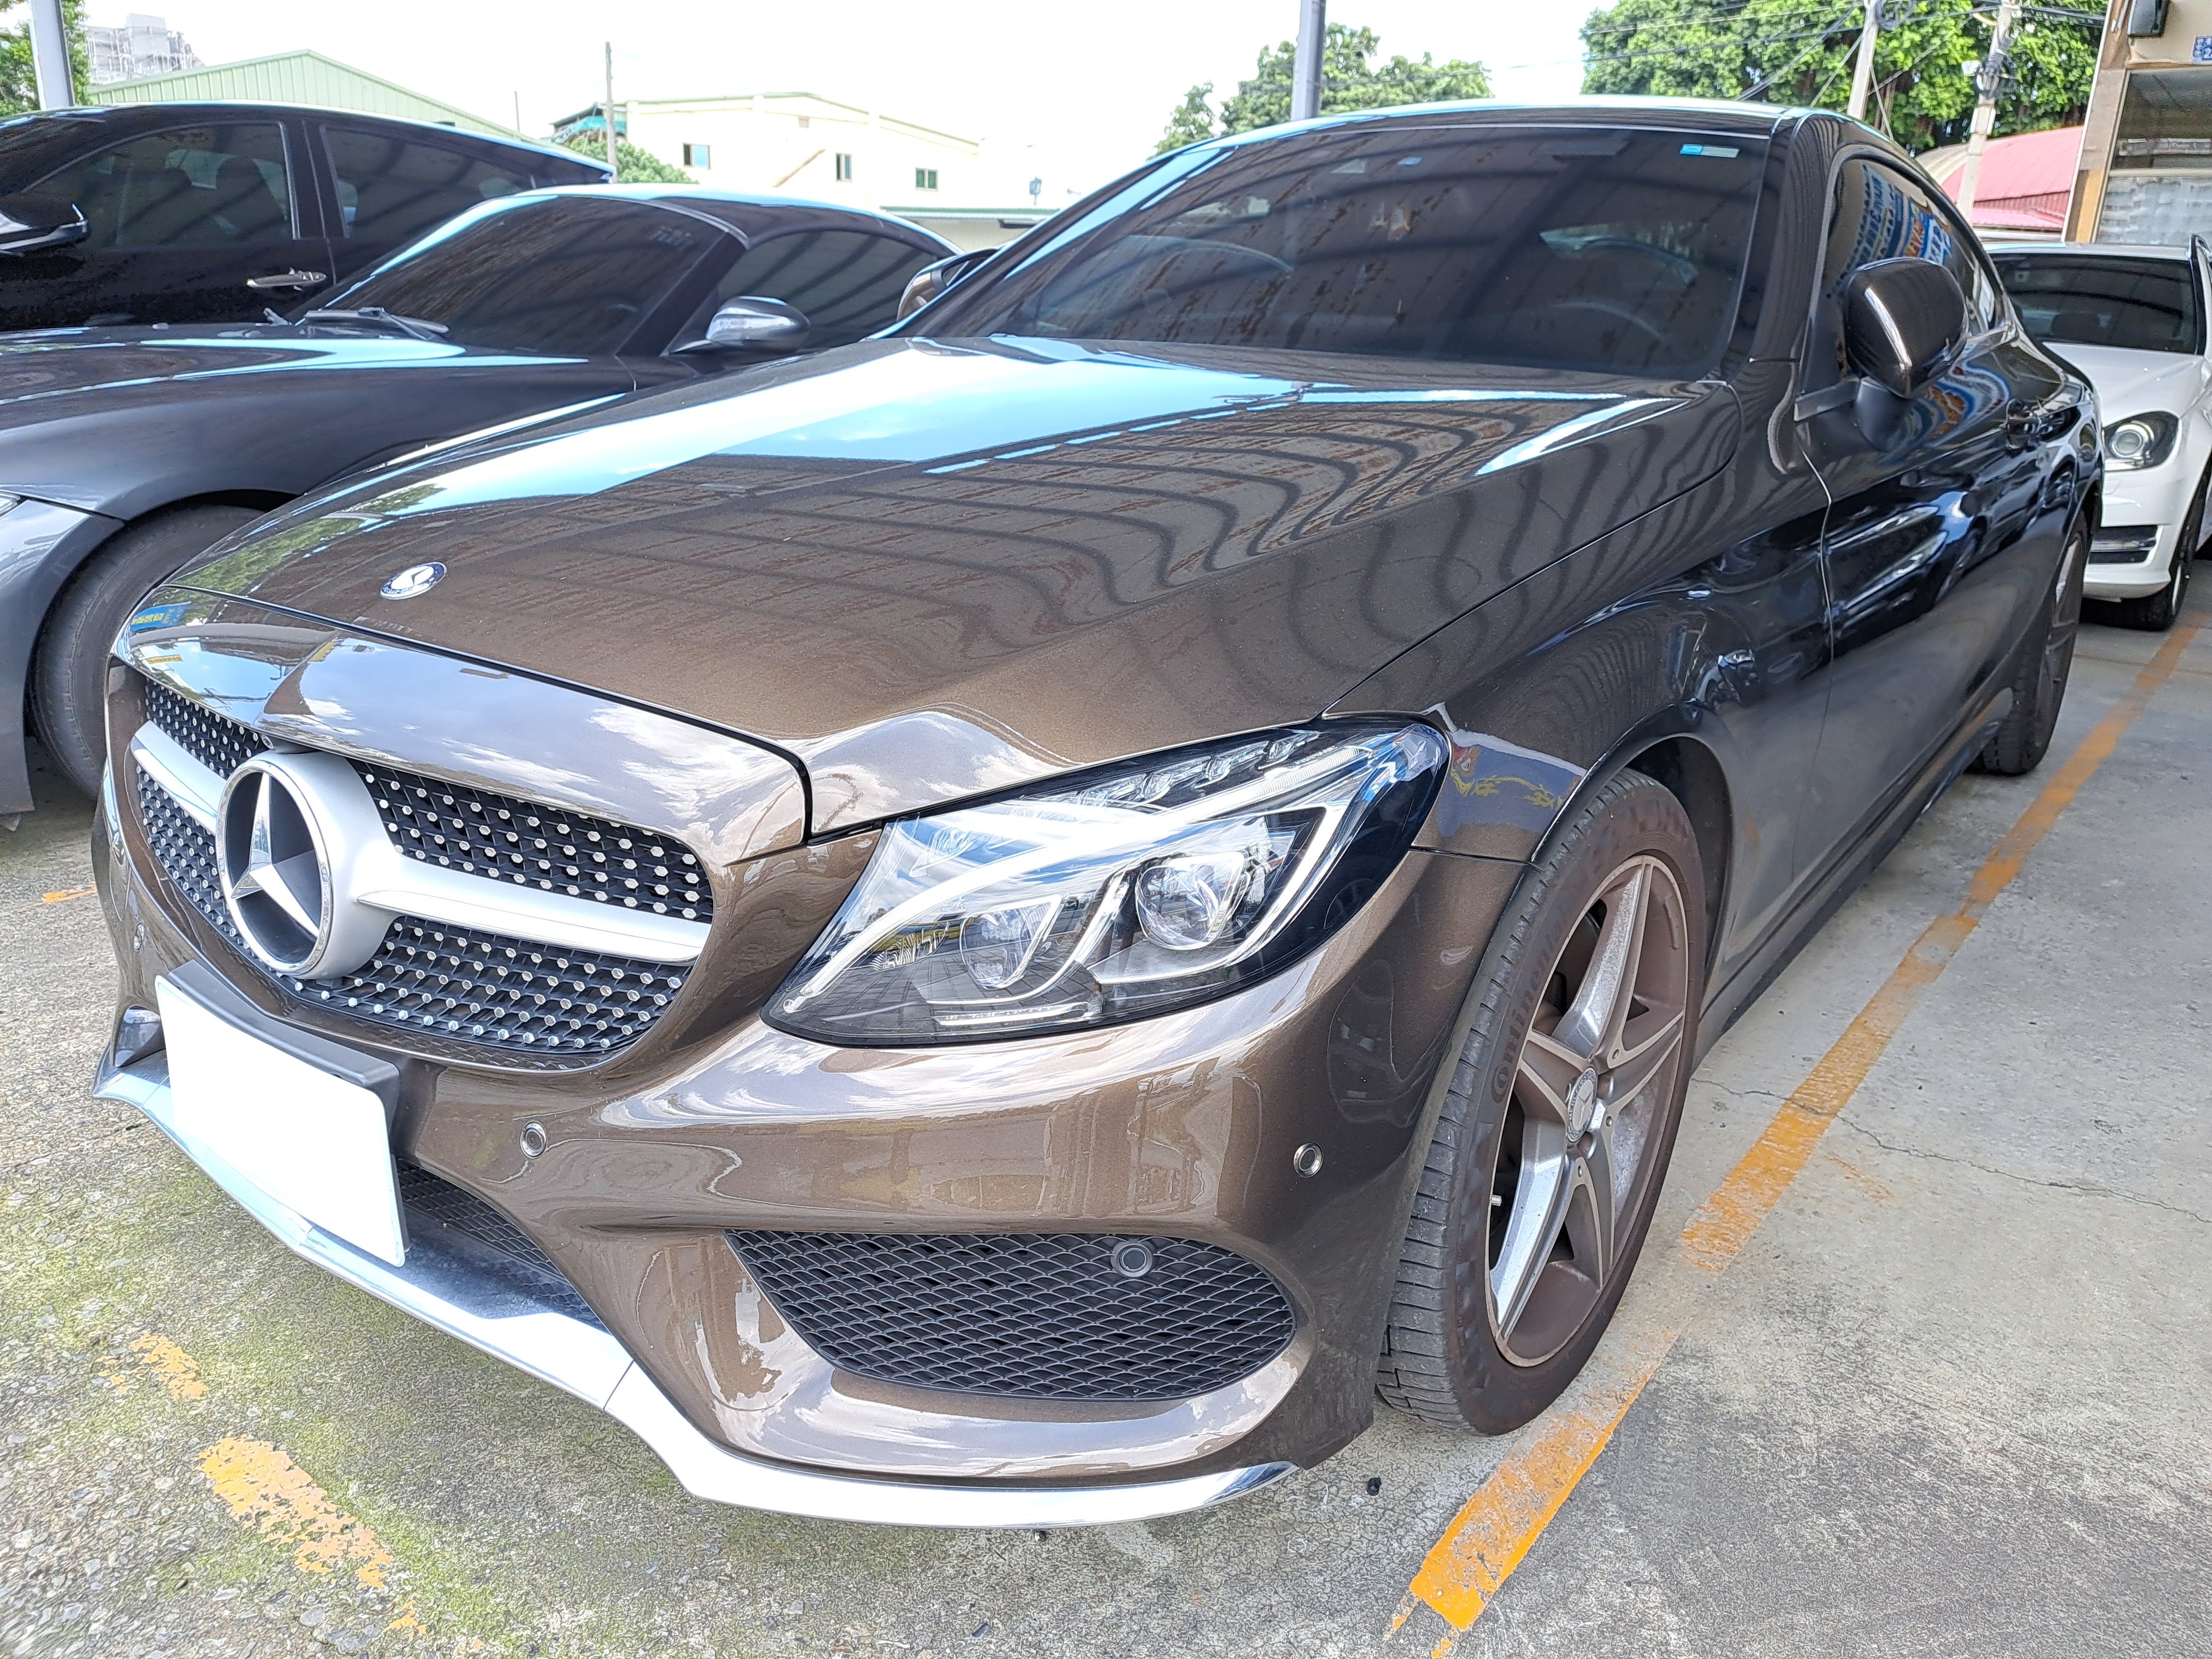 2016 M-Benz 賓士 C-class coupe